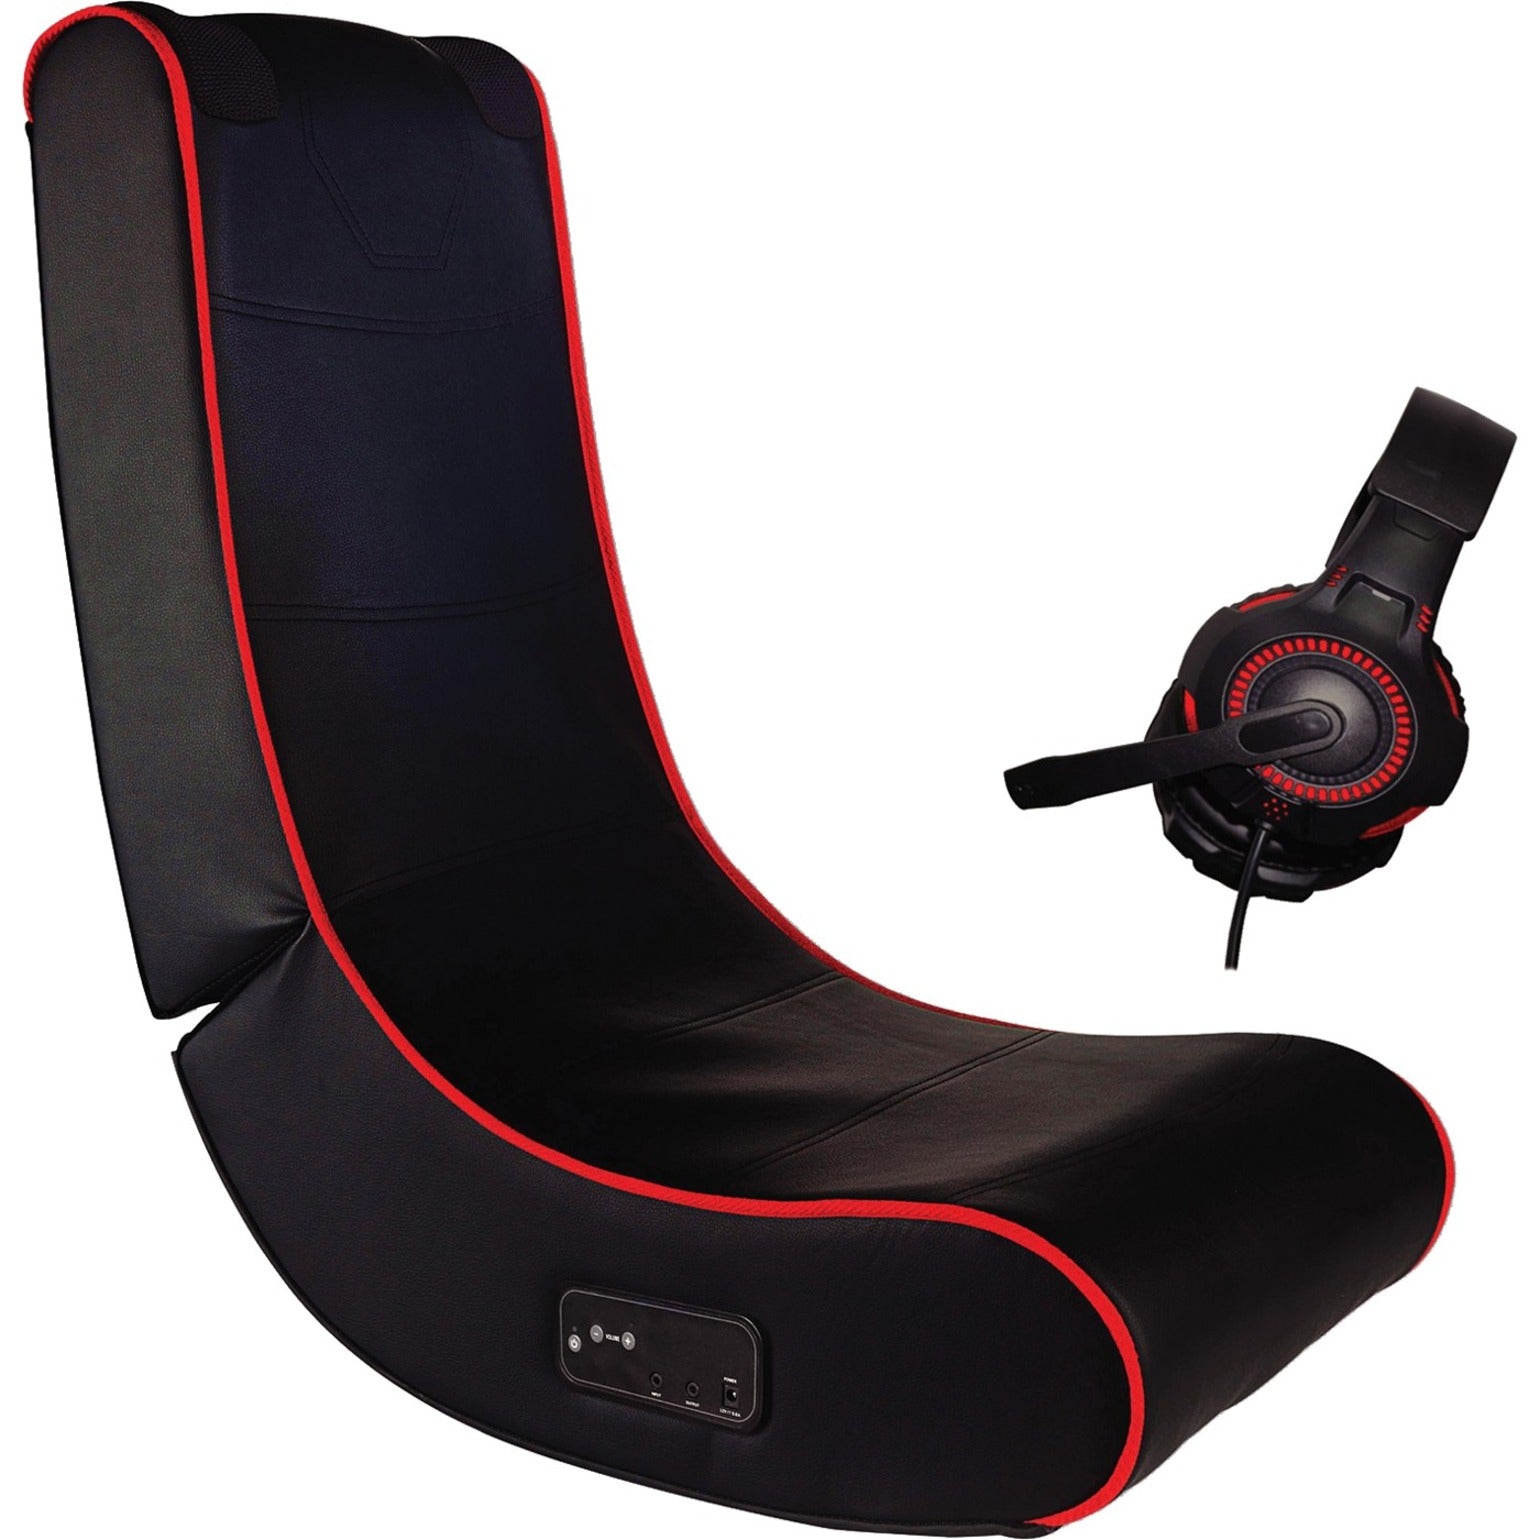 Sylvania Rocker Gaming Chair with Built-in Speakers, Bluetooth and Gaming Headset, Lightweight, Padded Seat, Breathable, Durable, Comfortable